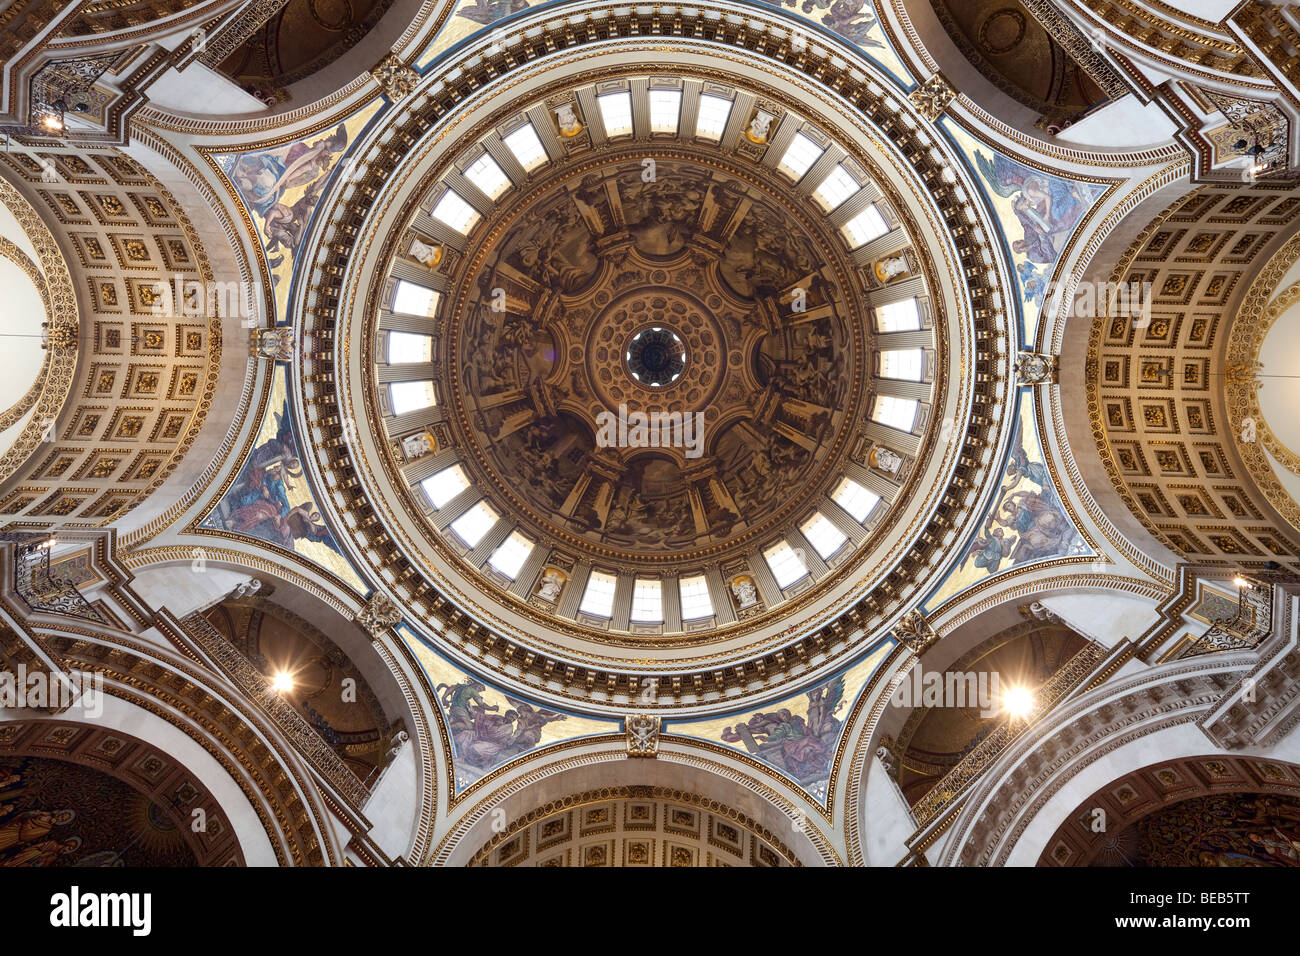 Innere des Main dome, St. Pauls Cathedral, London, England, UK Stockfoto